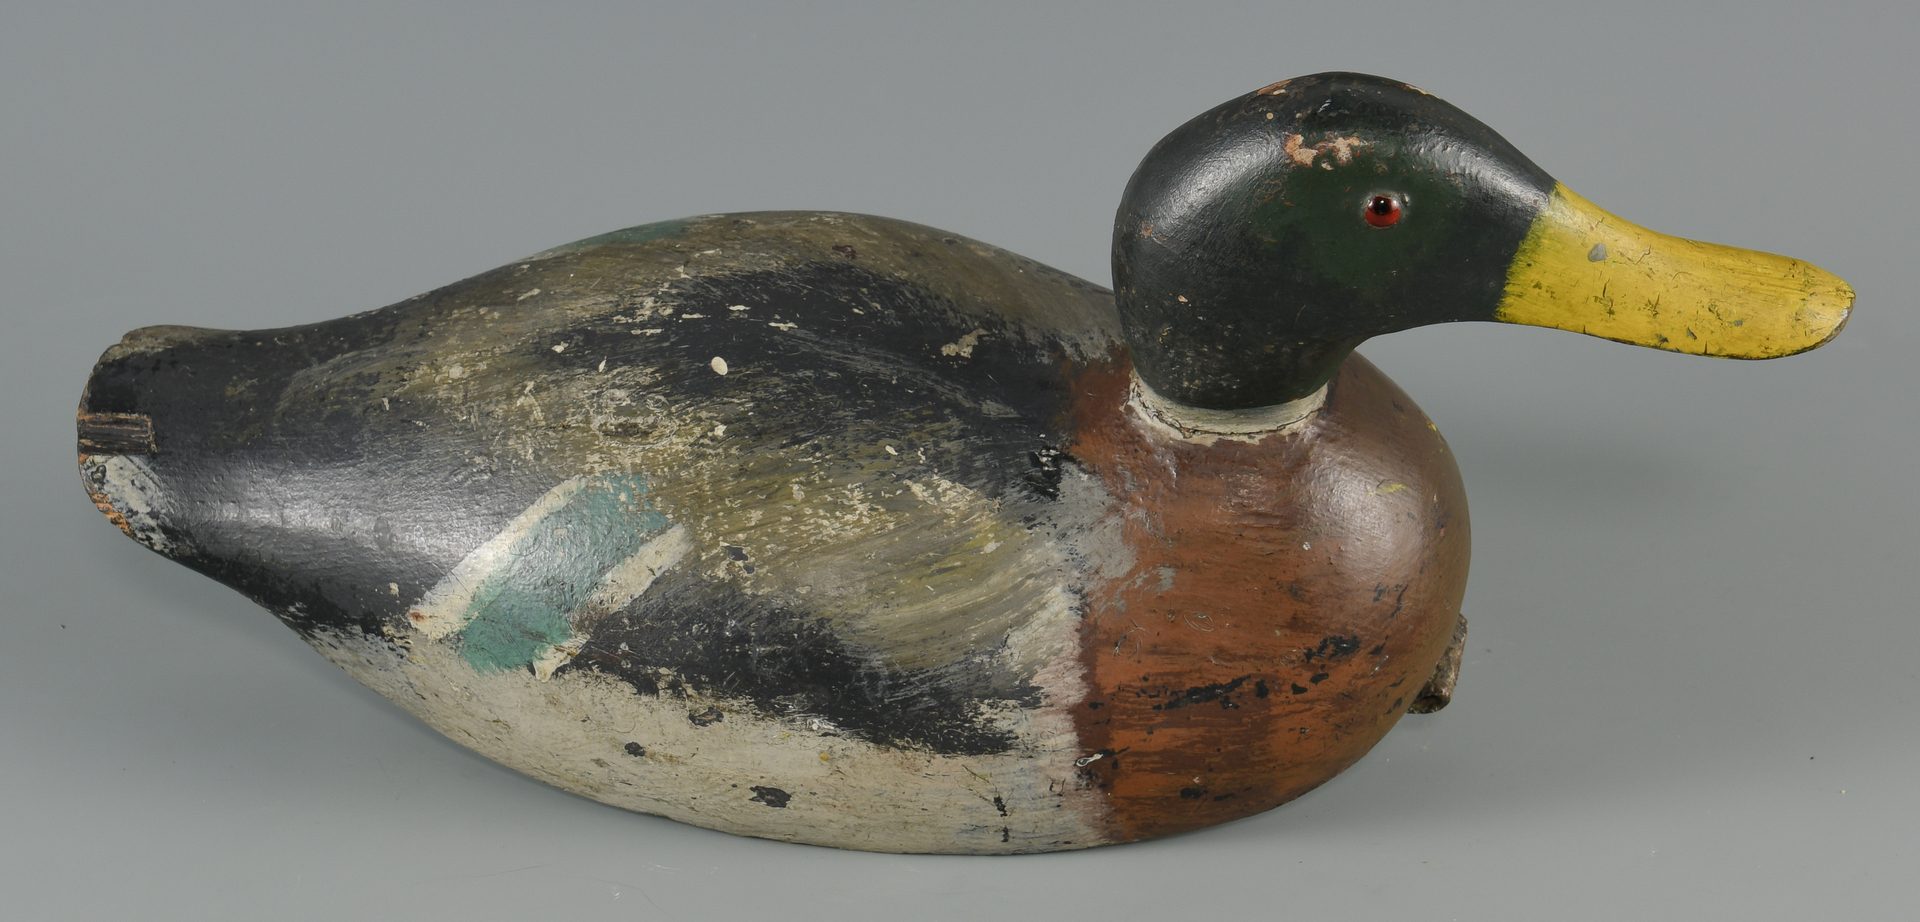 Lot 634: 2 Carved Duck Decoys